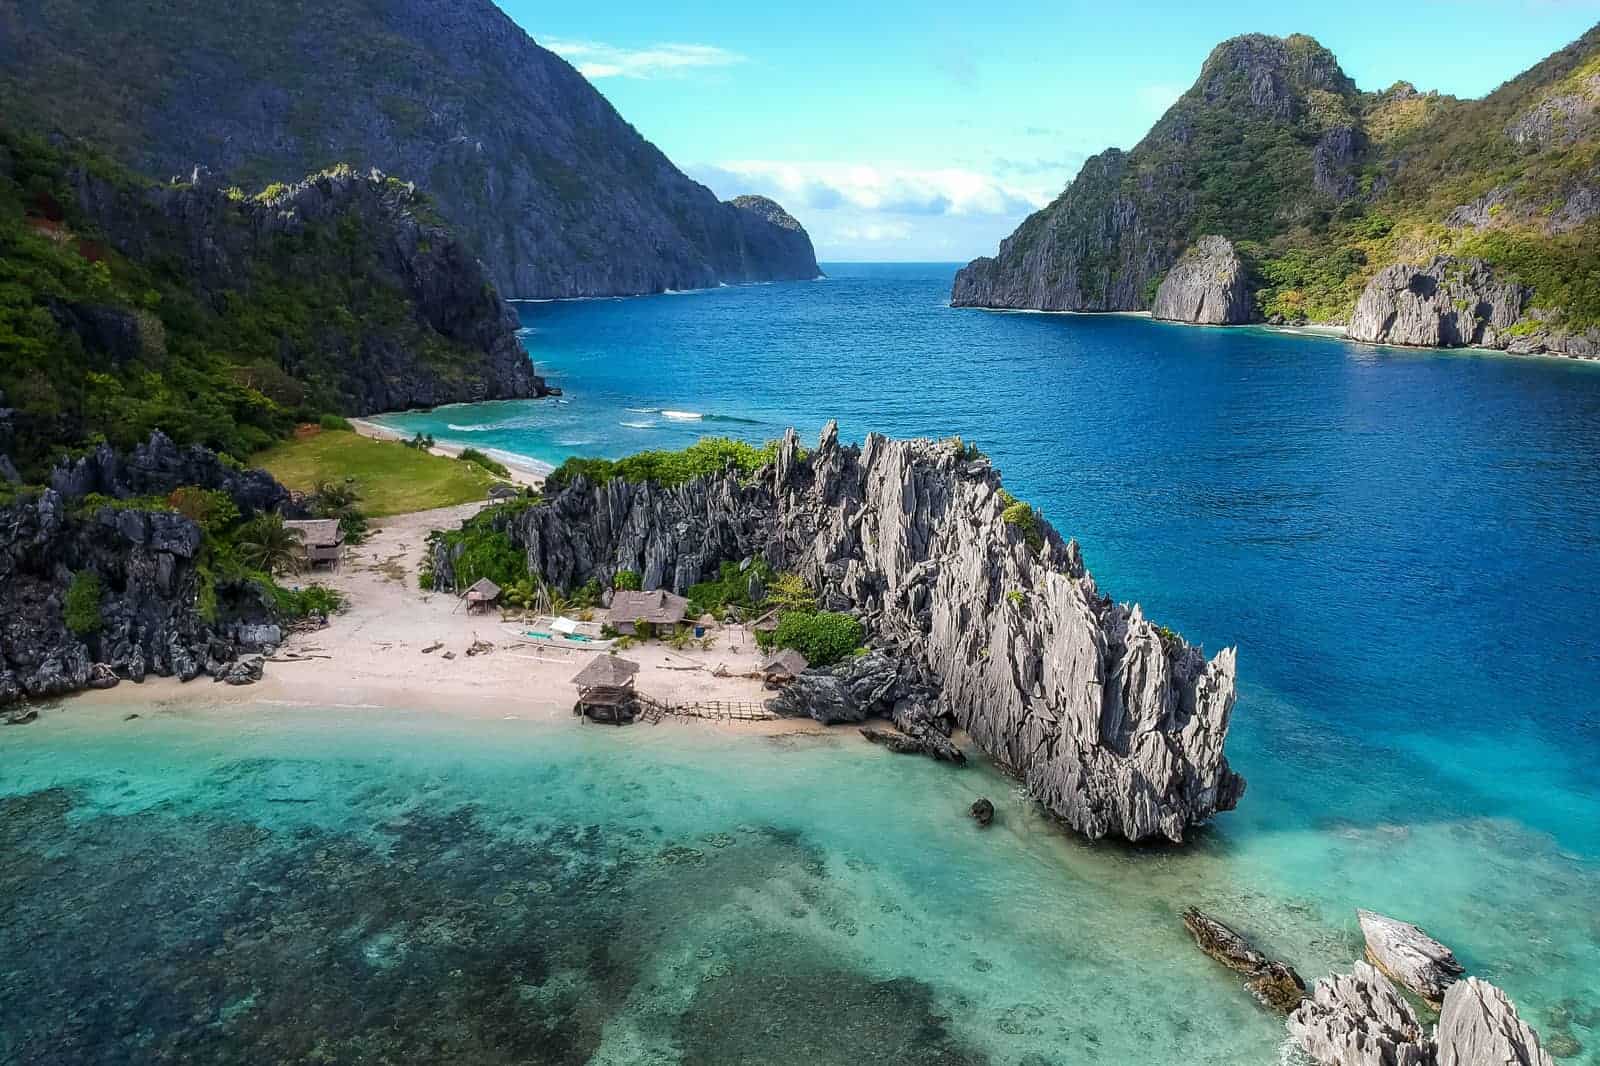 Backpacking Philippines (IN-DEPTH 2023 Travel Guide)